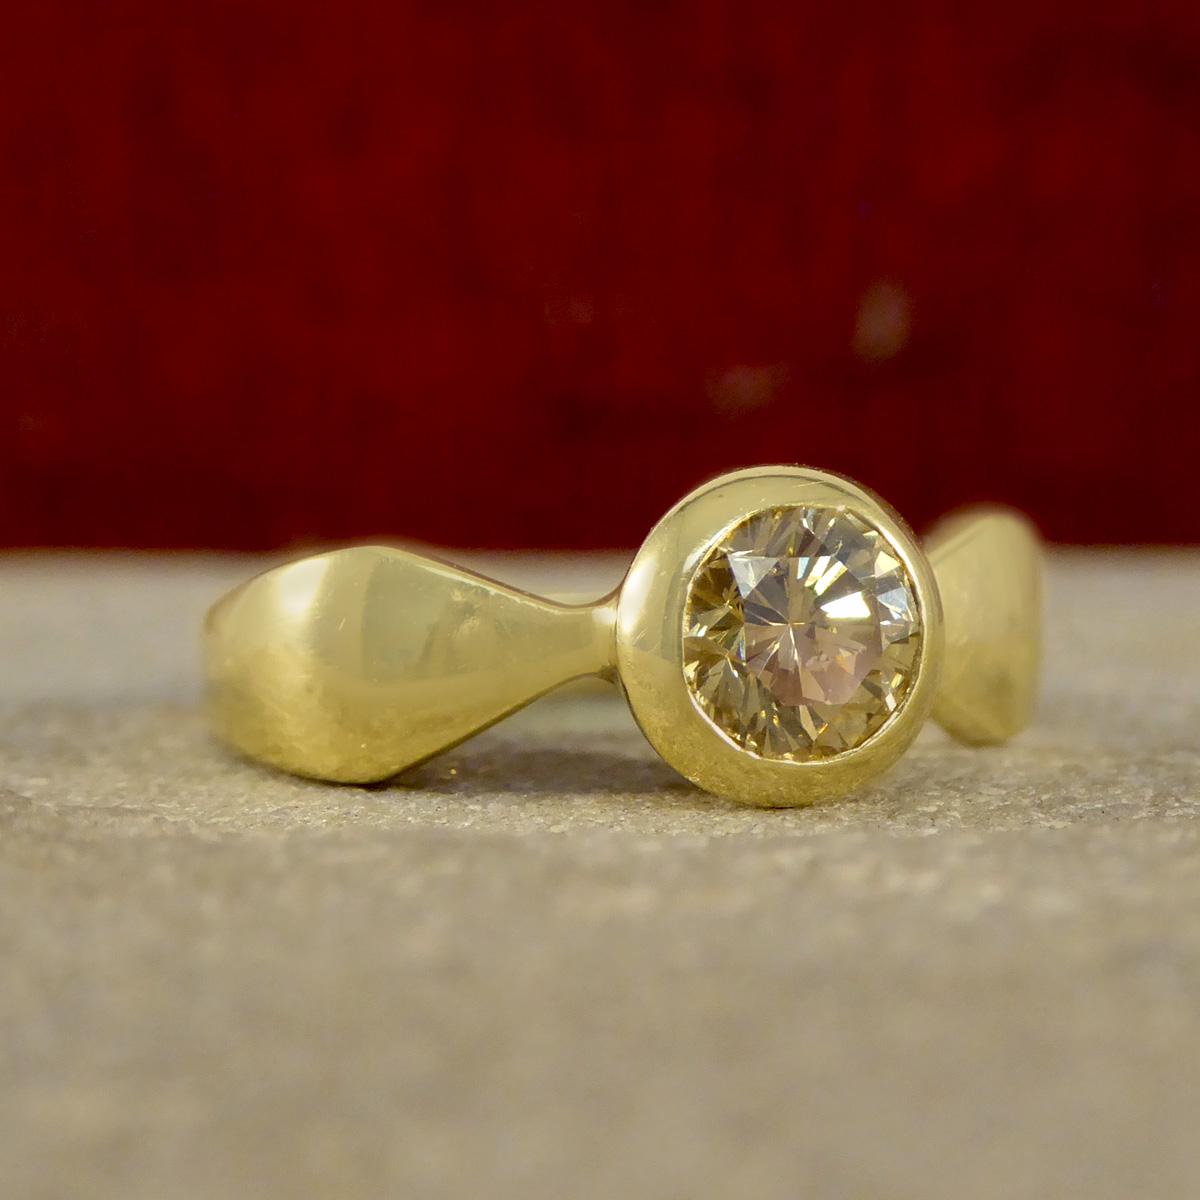 This elegant bezel set 0.60ct chestnut diamond ring in 18ct Yellow Gold is a true testament to timeless style and sophistication. Featuring a captivating 0.60ct round brilliant cut diamond at its heart, this ring exudes warmth and brilliance. The